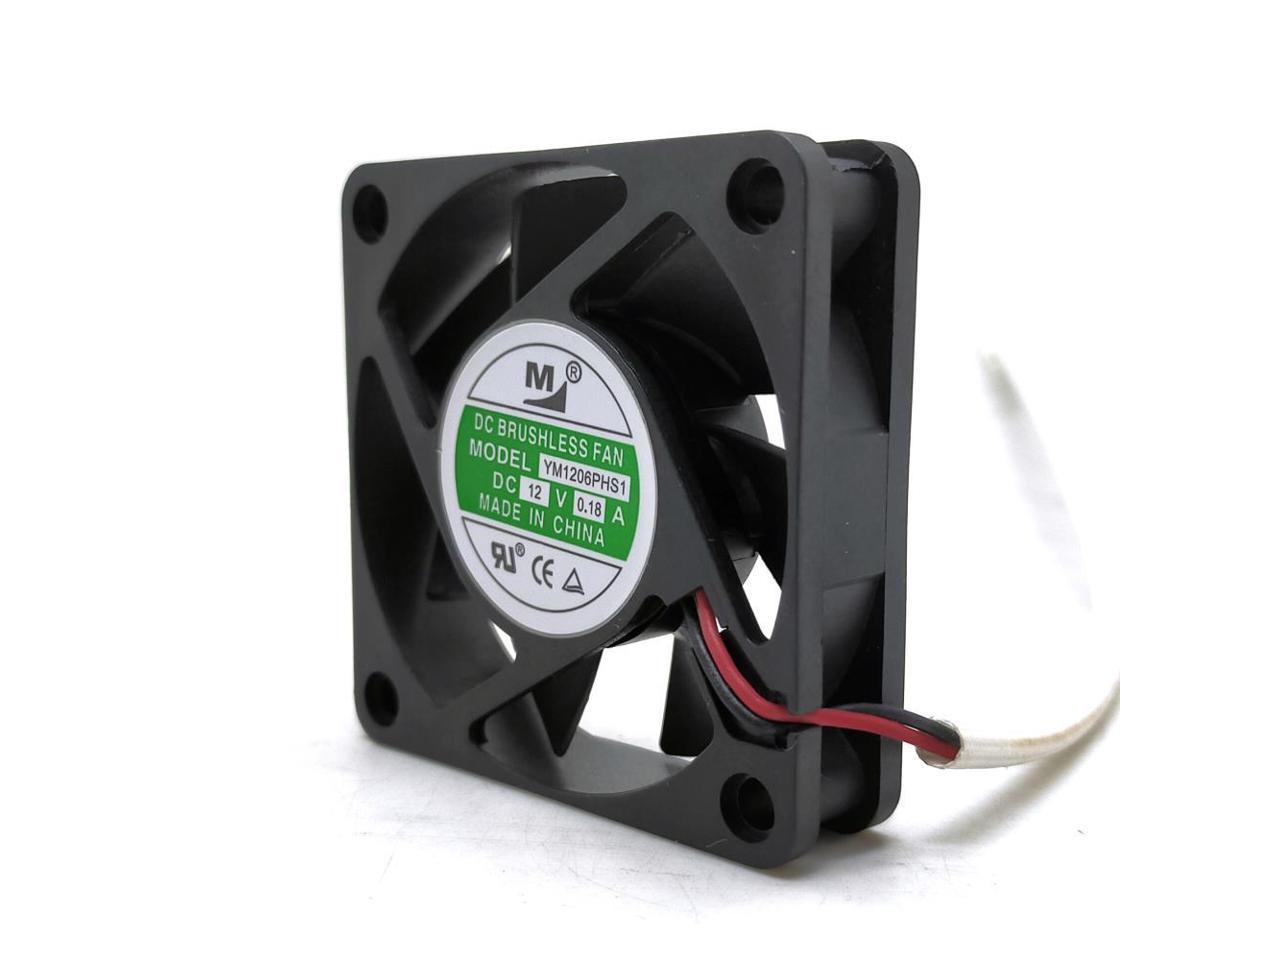 for Yatloon yuelun Mute Chassis Power Supply Cooling Fan 1202512cm d12sh-12v0.30a 